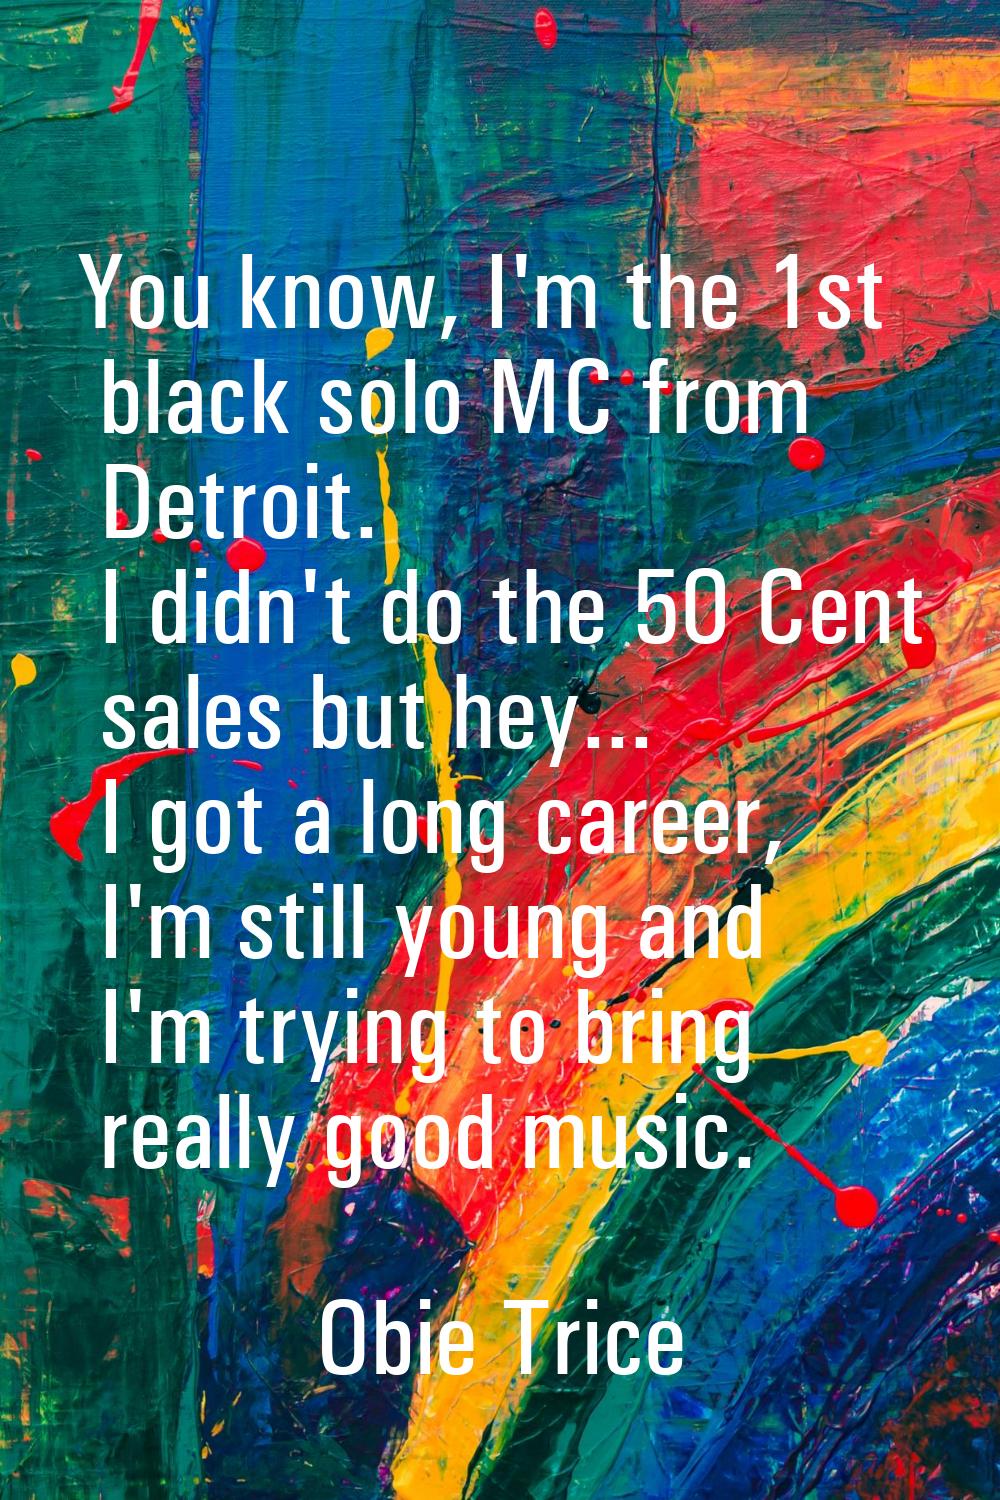 You know, I'm the 1st black solo MC from Detroit. I didn't do the 50 Cent sales but hey... I got a 